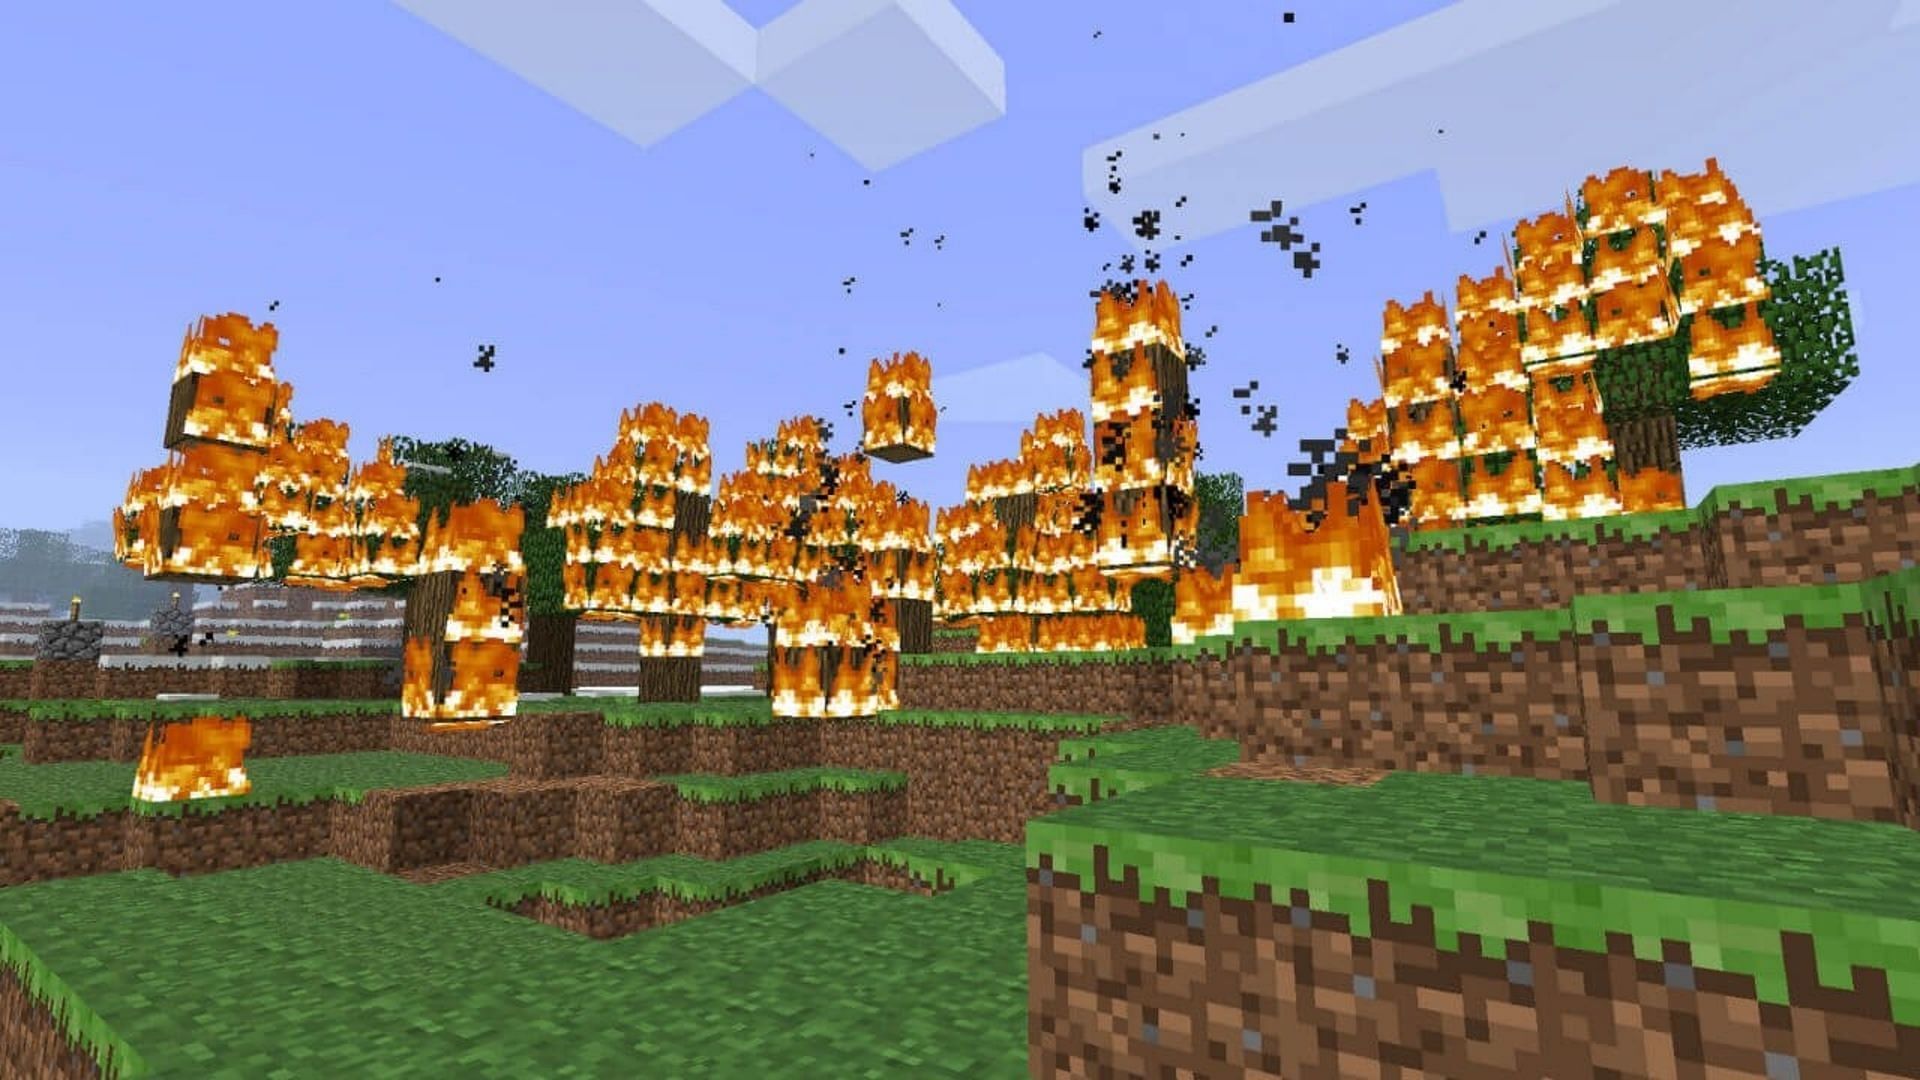 Players should be careful with fire as it spreads quite easily (Image via Mojang)